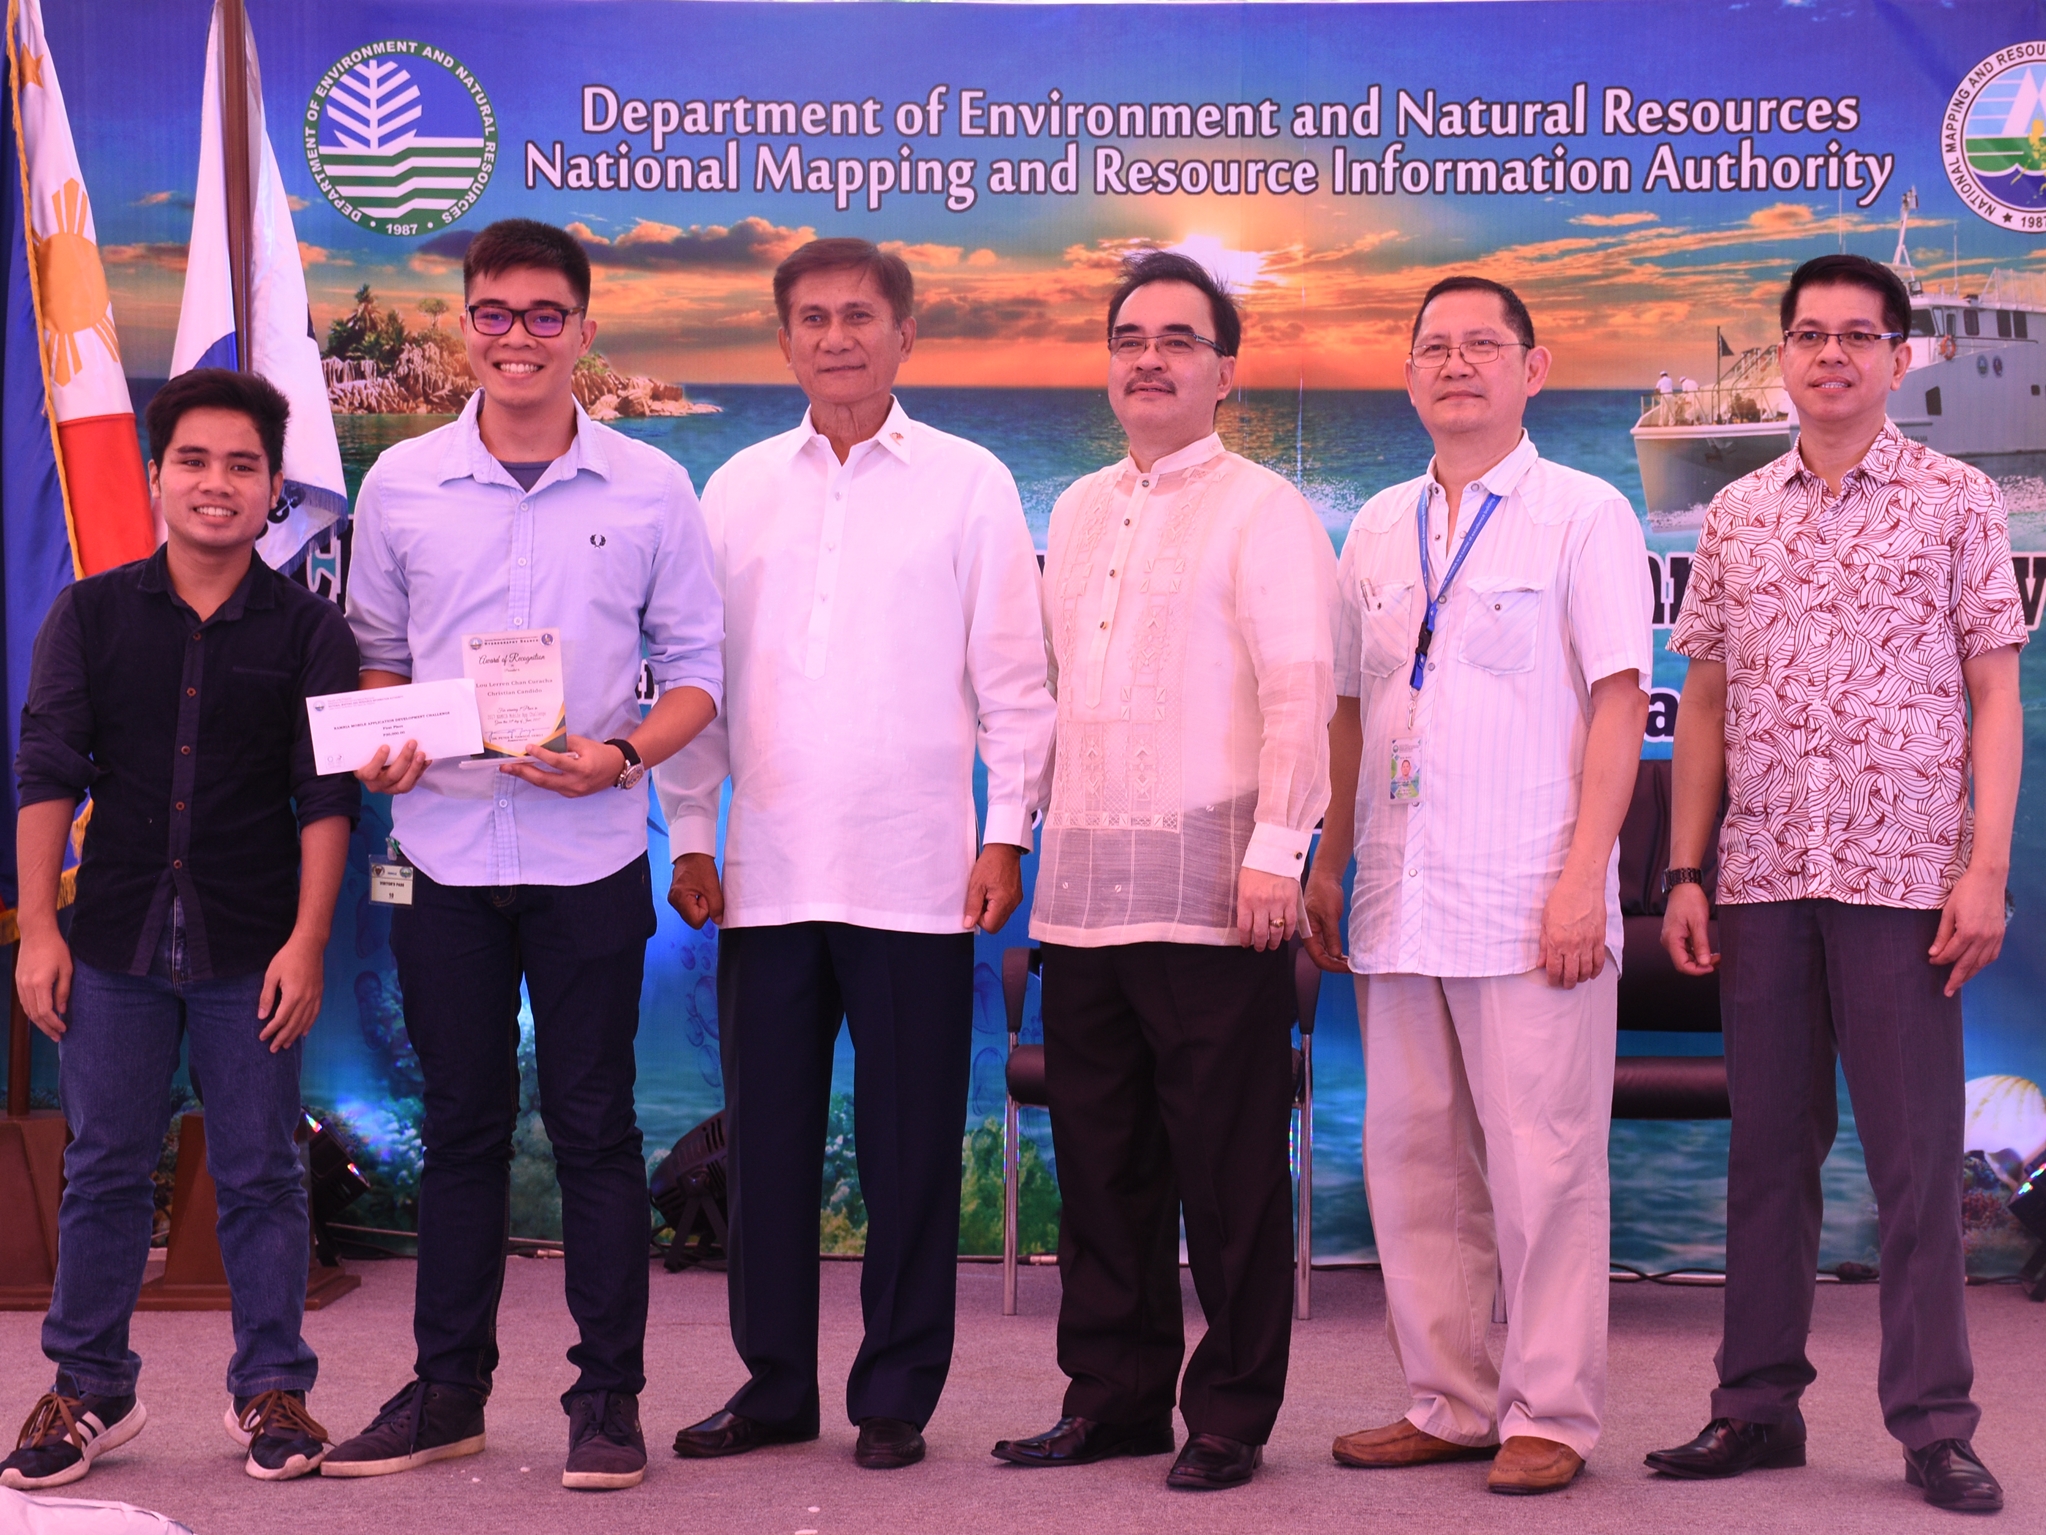 UP Geodetic Engineering Students Winner of the NAMRIA Mobile App Contest